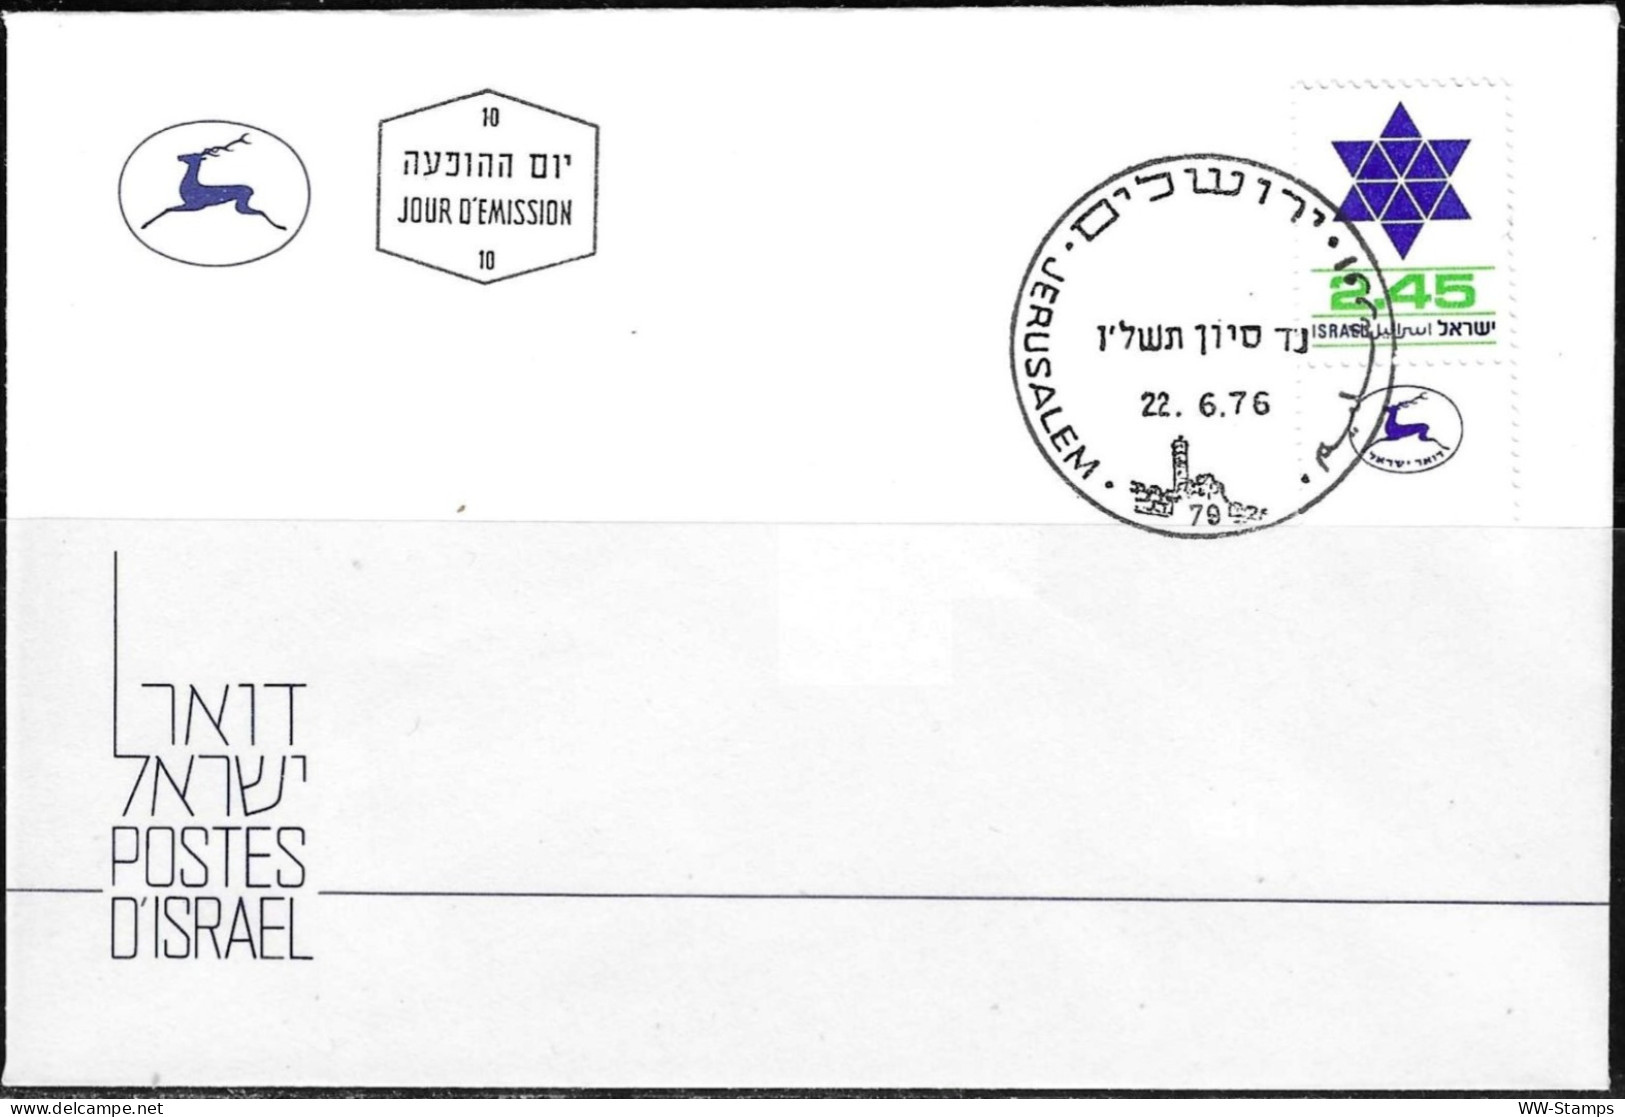 Israel 1976 FDC Star Of David Definitive [ILT2161] - Covers & Documents